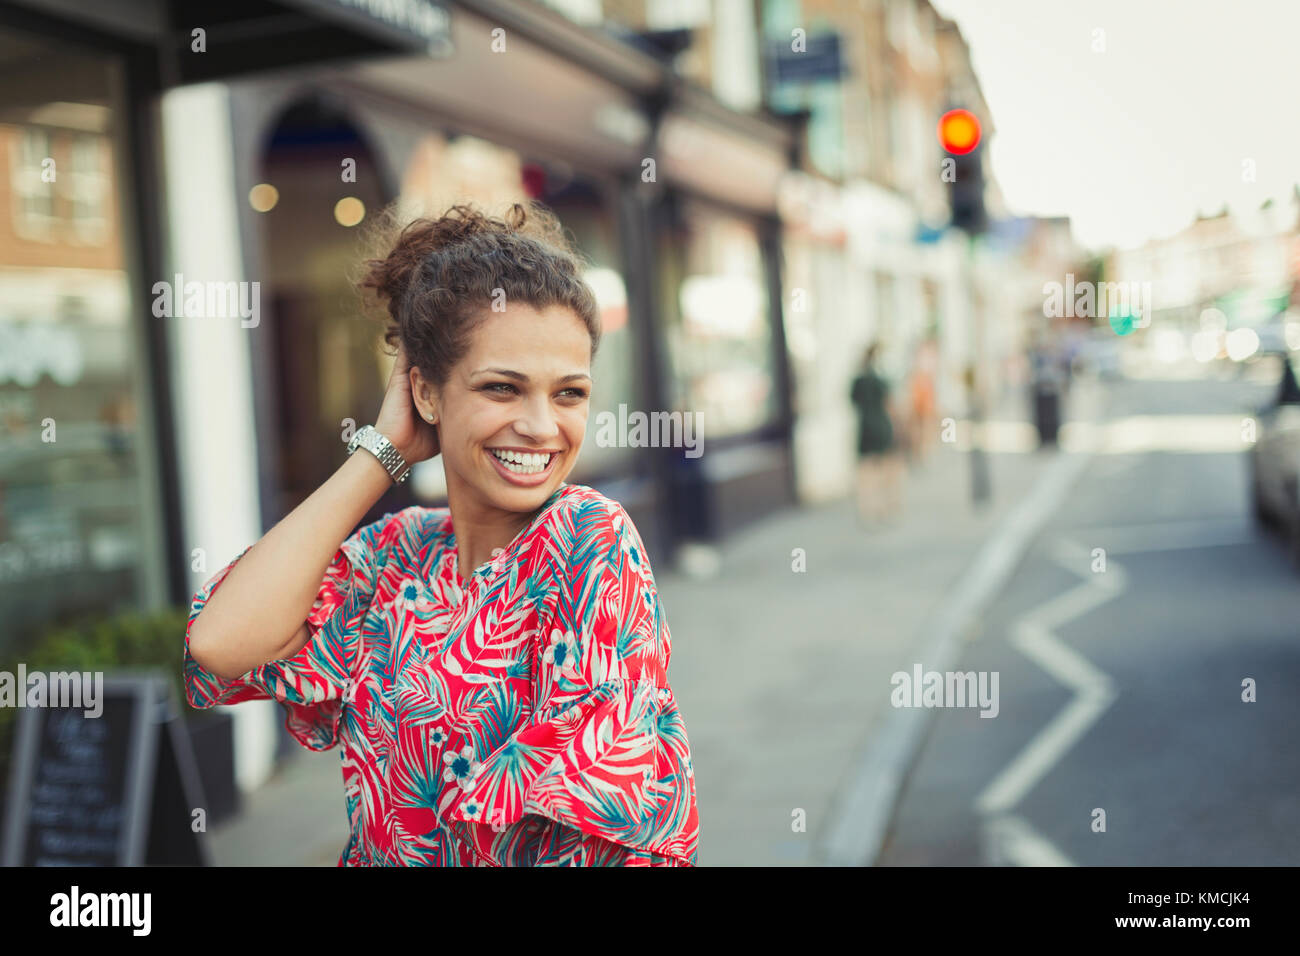 Portrait confident, laughing young woman on urban street Stock Photo